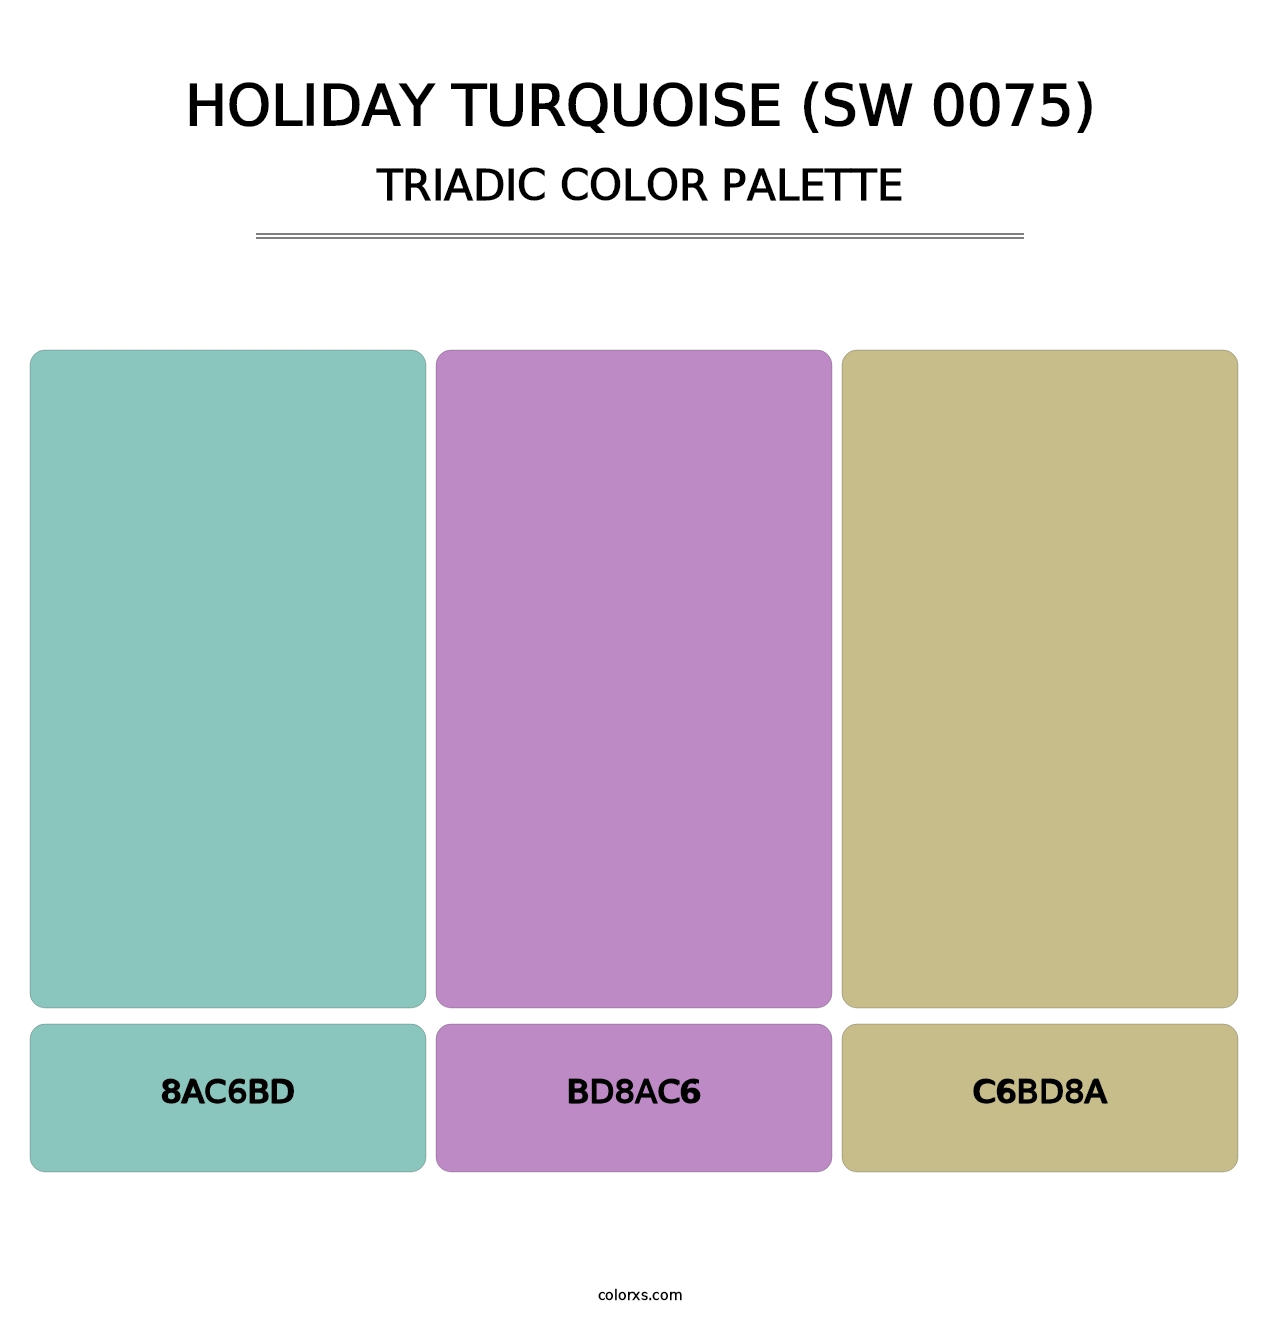 Holiday Turquoise (SW 0075) - Triadic Color Palette